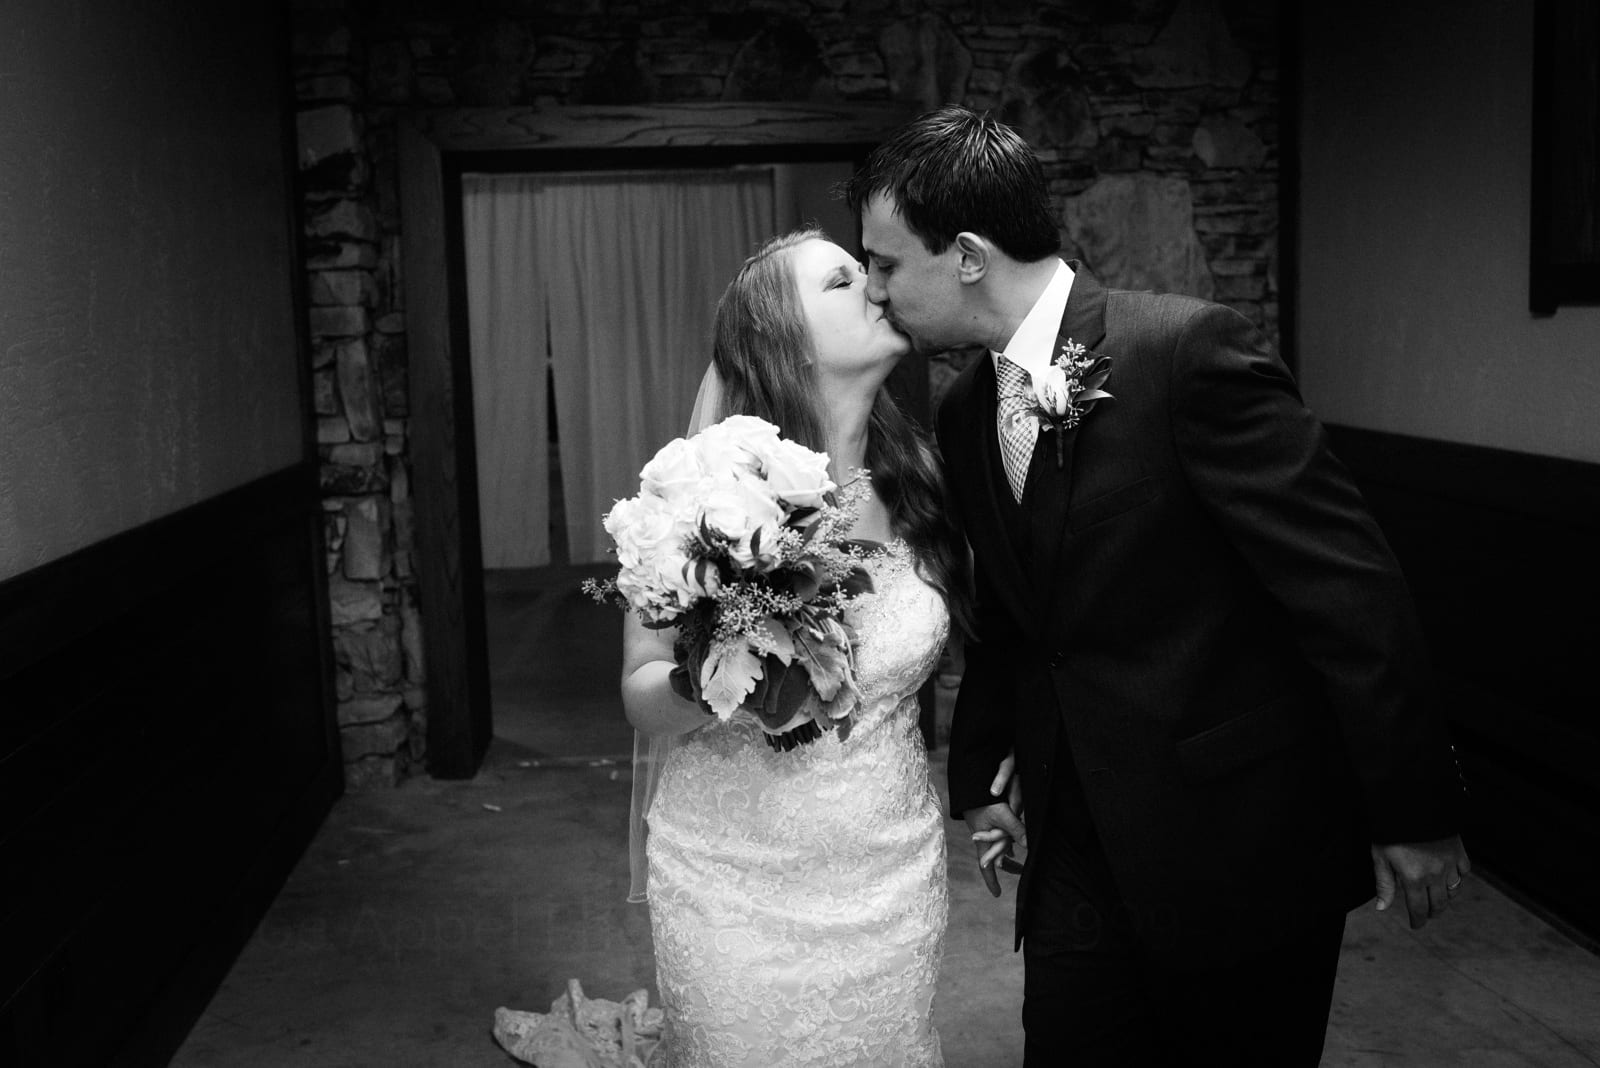 A bride and groom walk down a hallway while kissing each other on the lips during their Fall Wedding at Seven Springs.